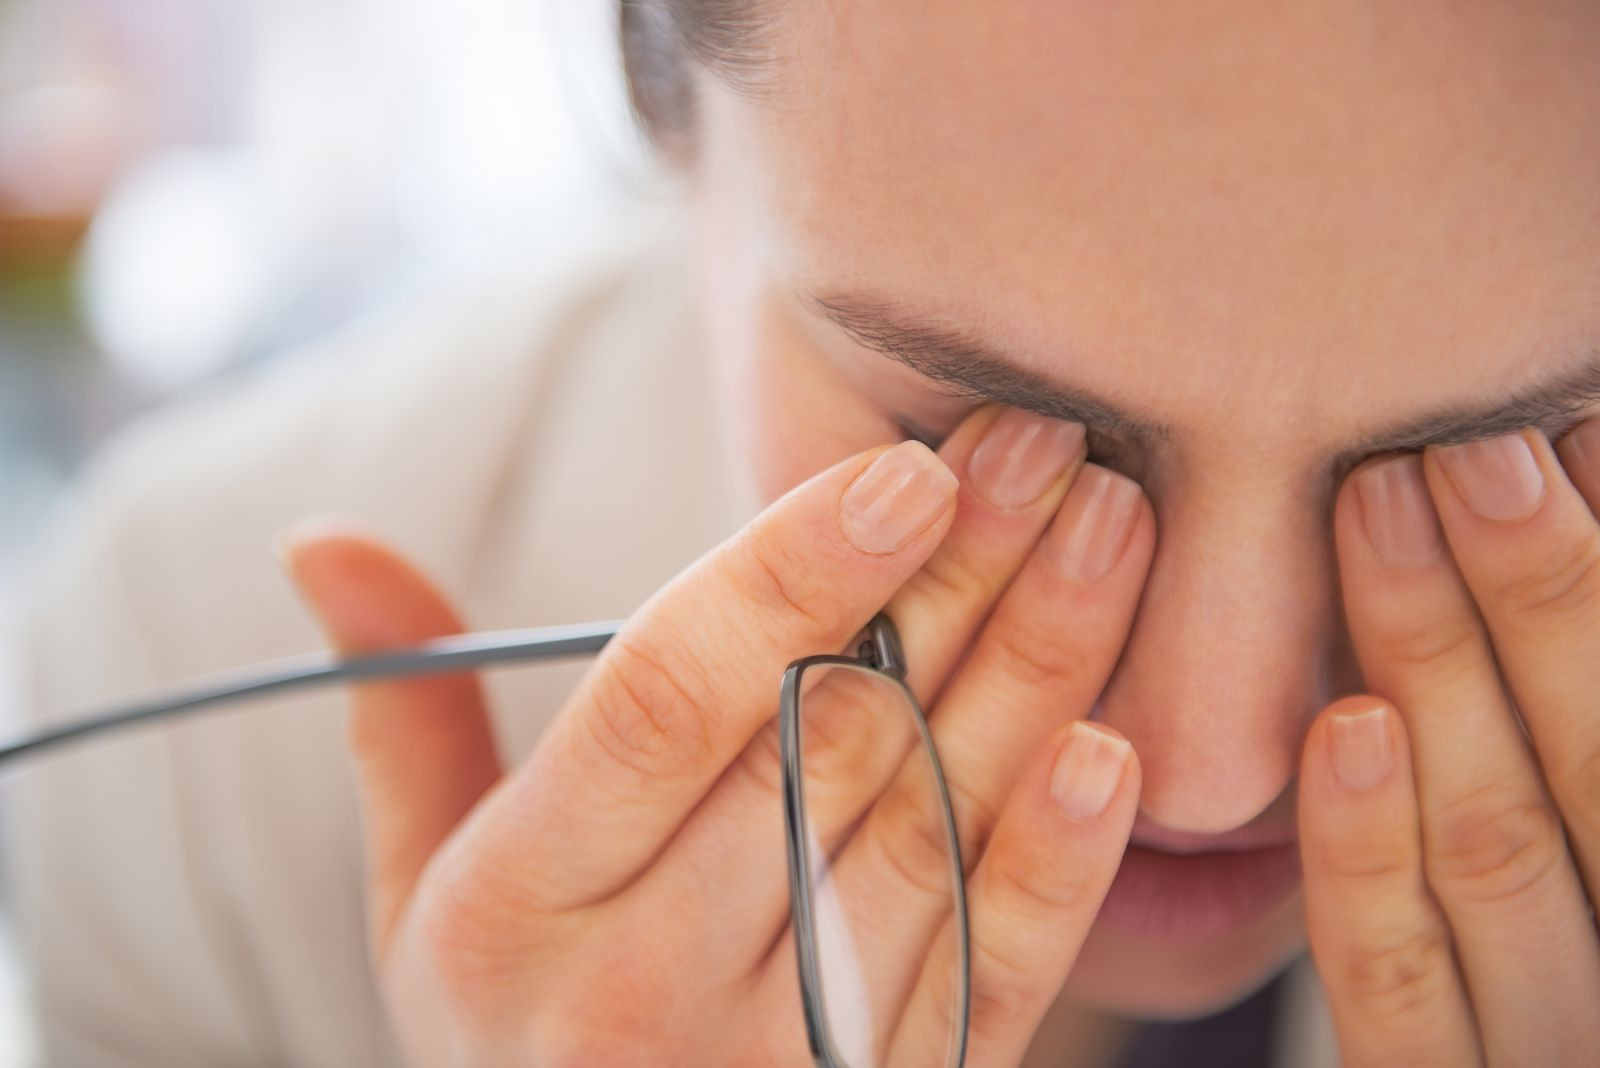 Warning signs of a serious eye problem